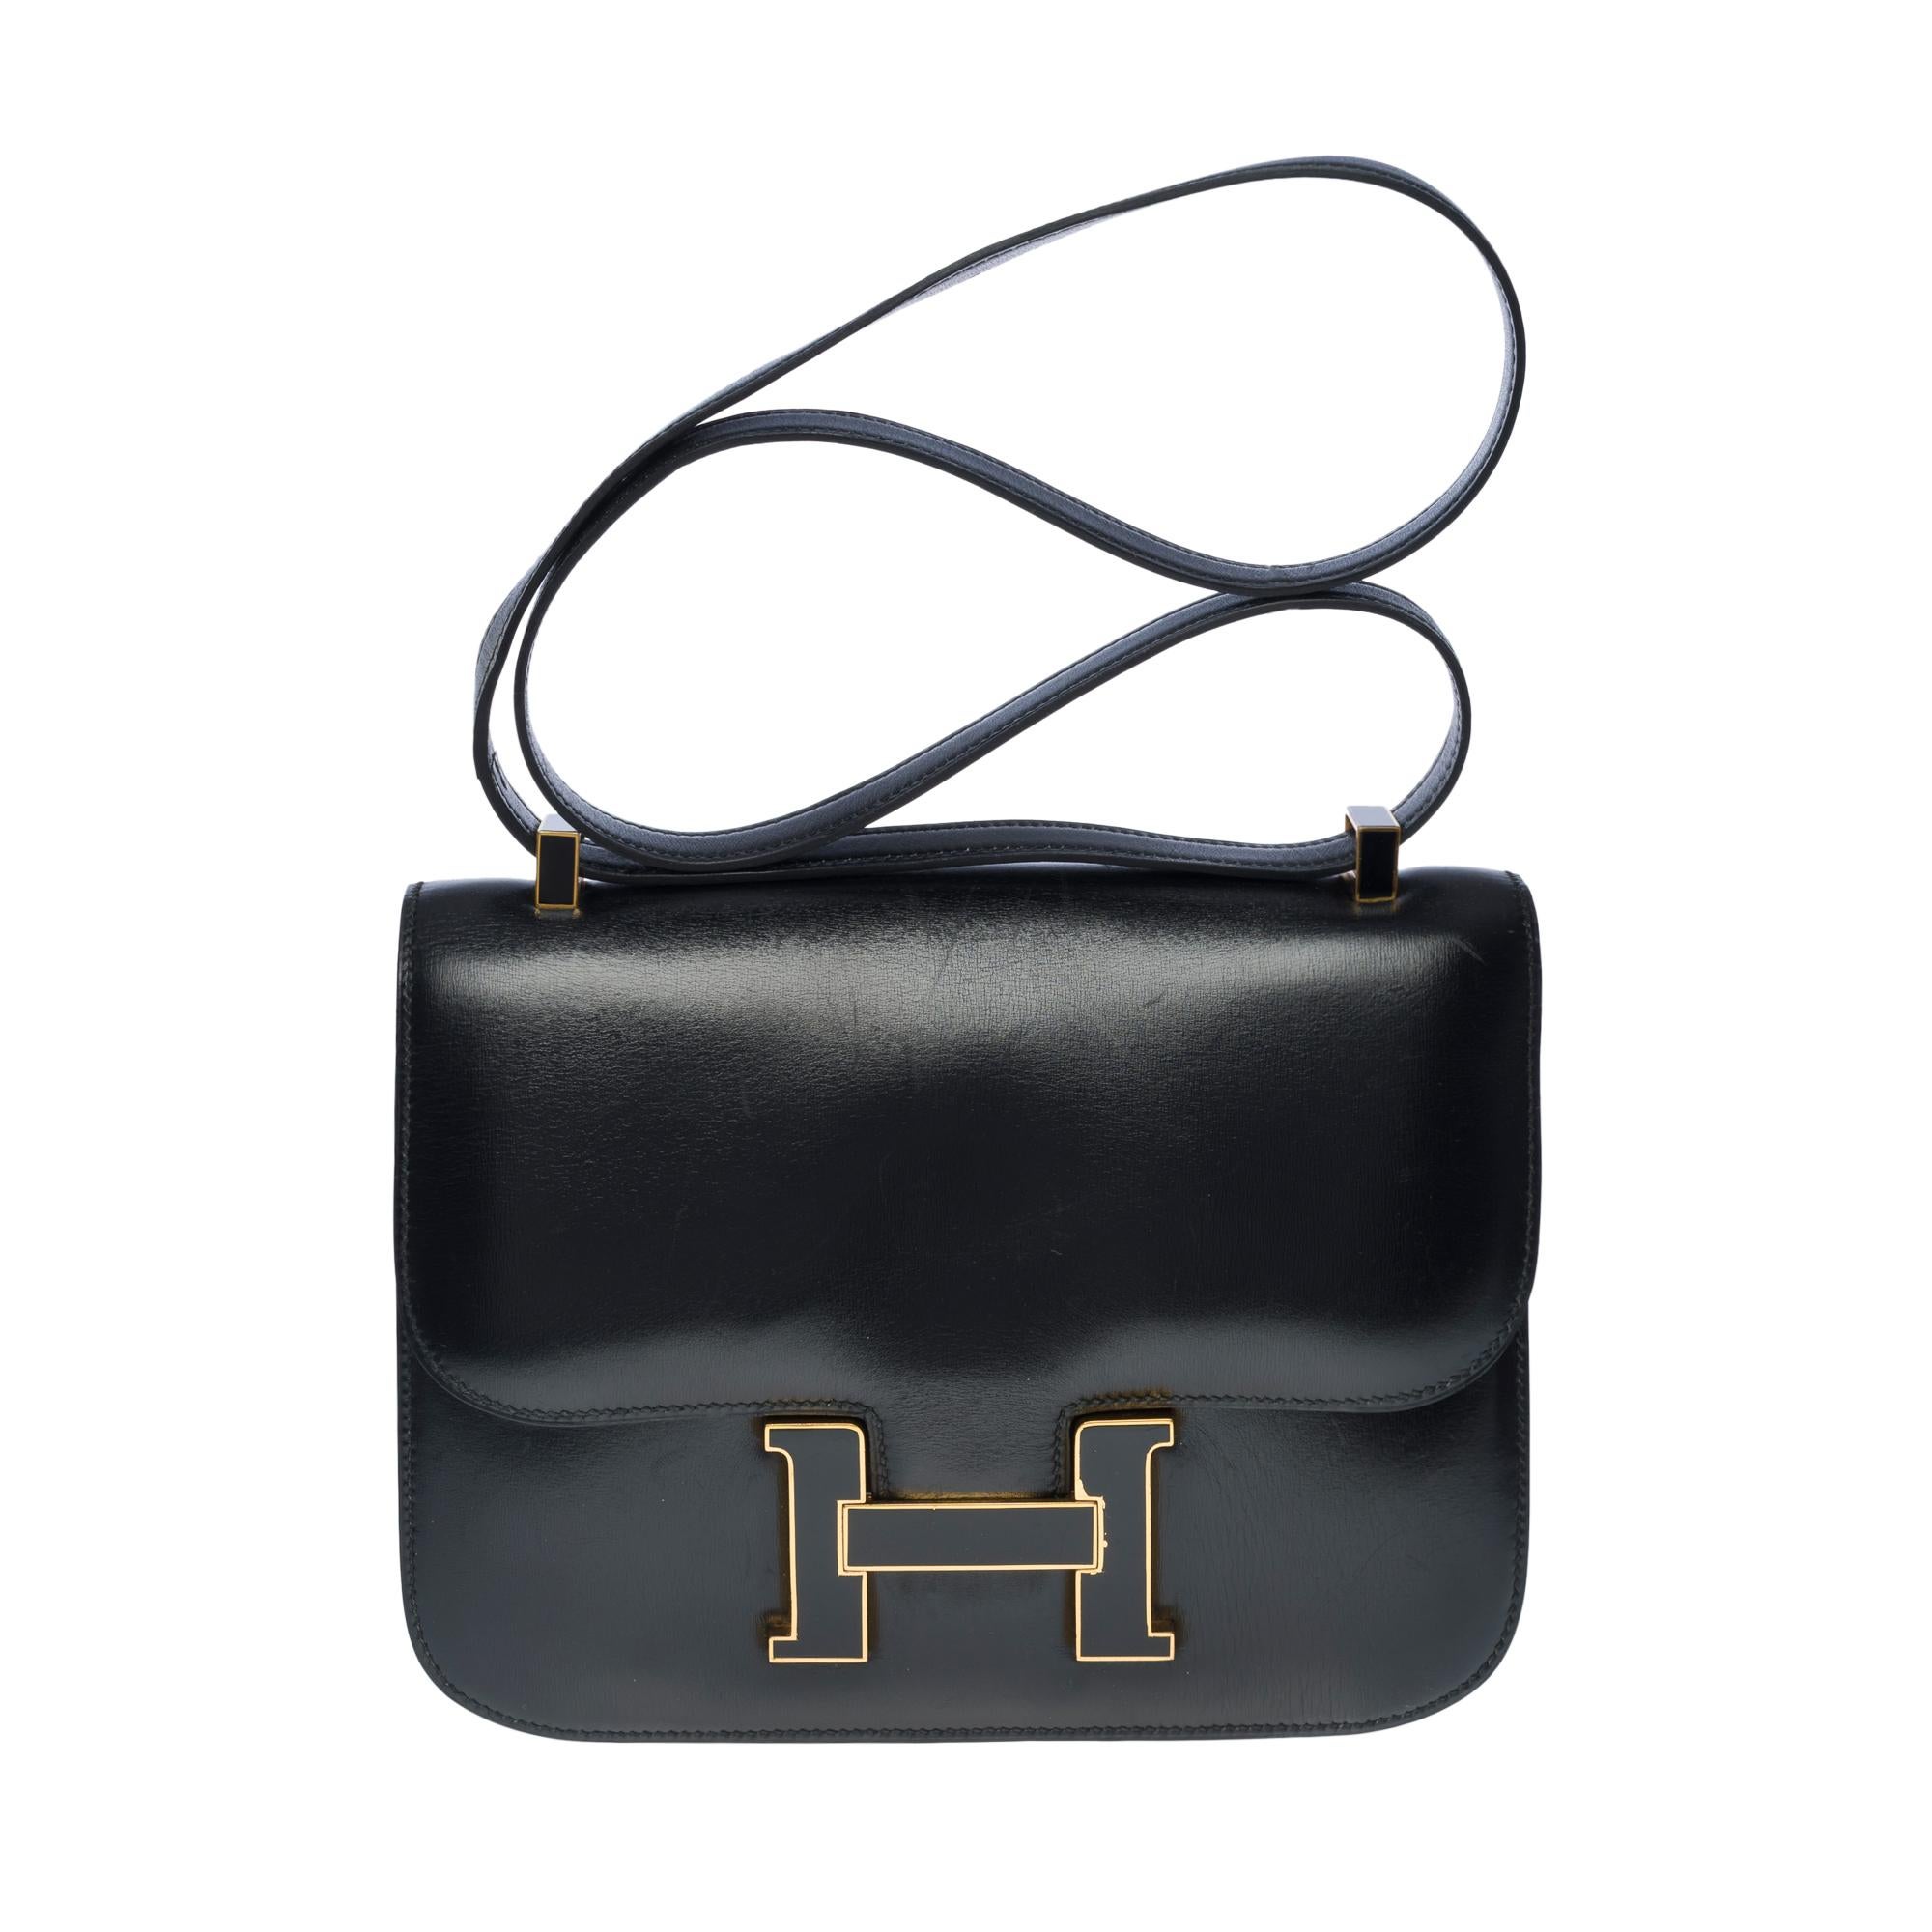 Rare & Amazing Hermes Constance 23 limited edition in black box calf leather , gold-plated and enamel metal hardware, convertible handle in black leather for a hand, shoulder or crossbody carry

Closure marked H on flap
A patch pocket on the back of